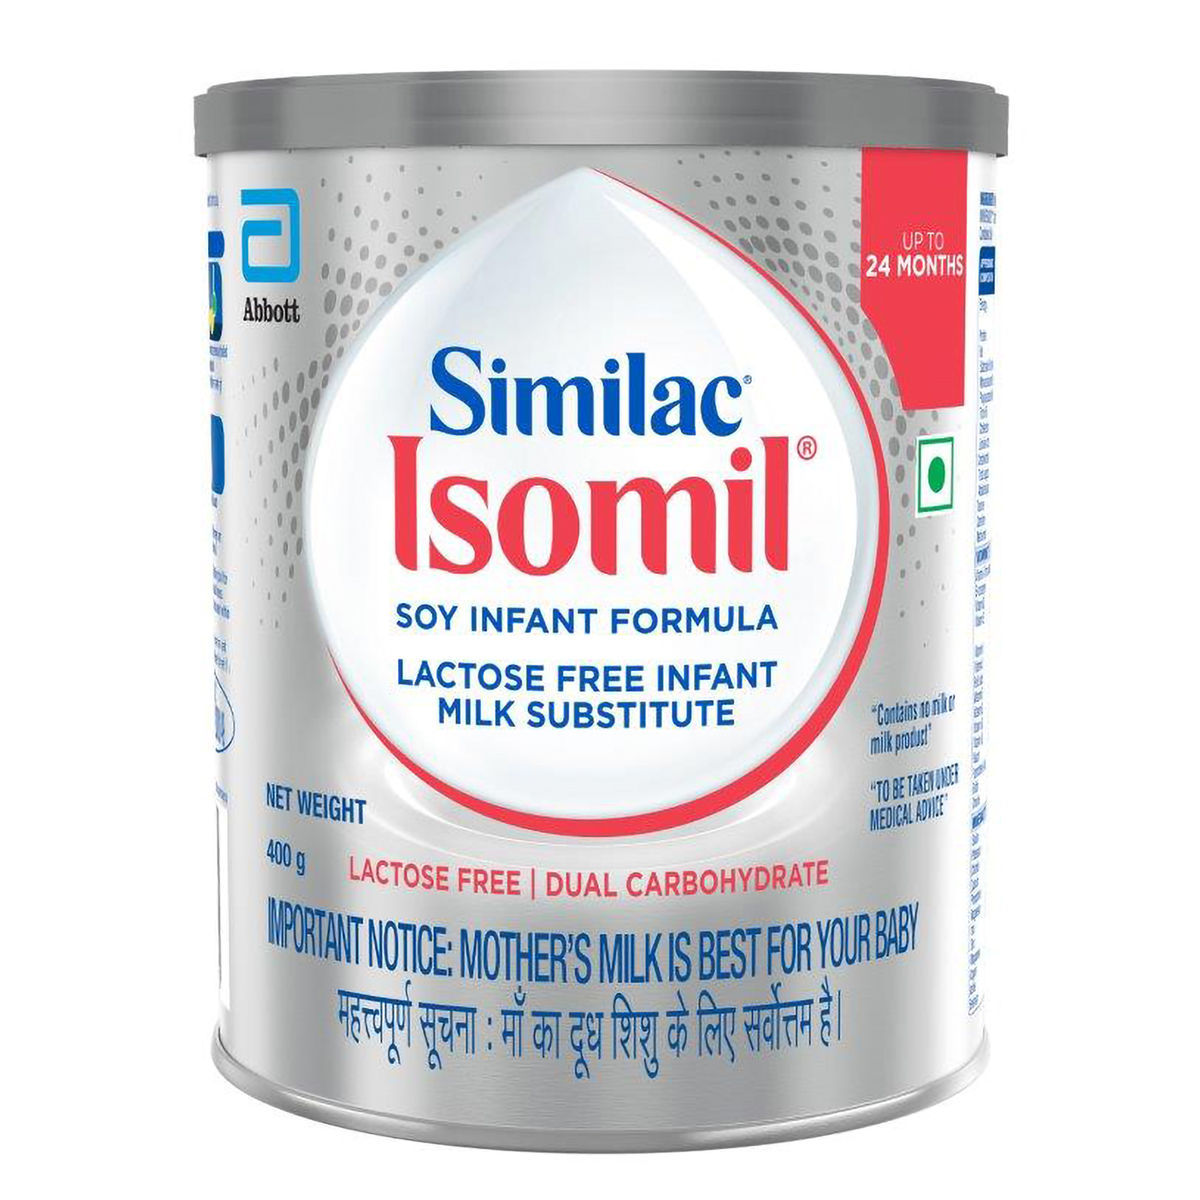 Buy Similac Isomil Soy Infant Formula Powder for Up to 24 Months Kids, 400 gm Online